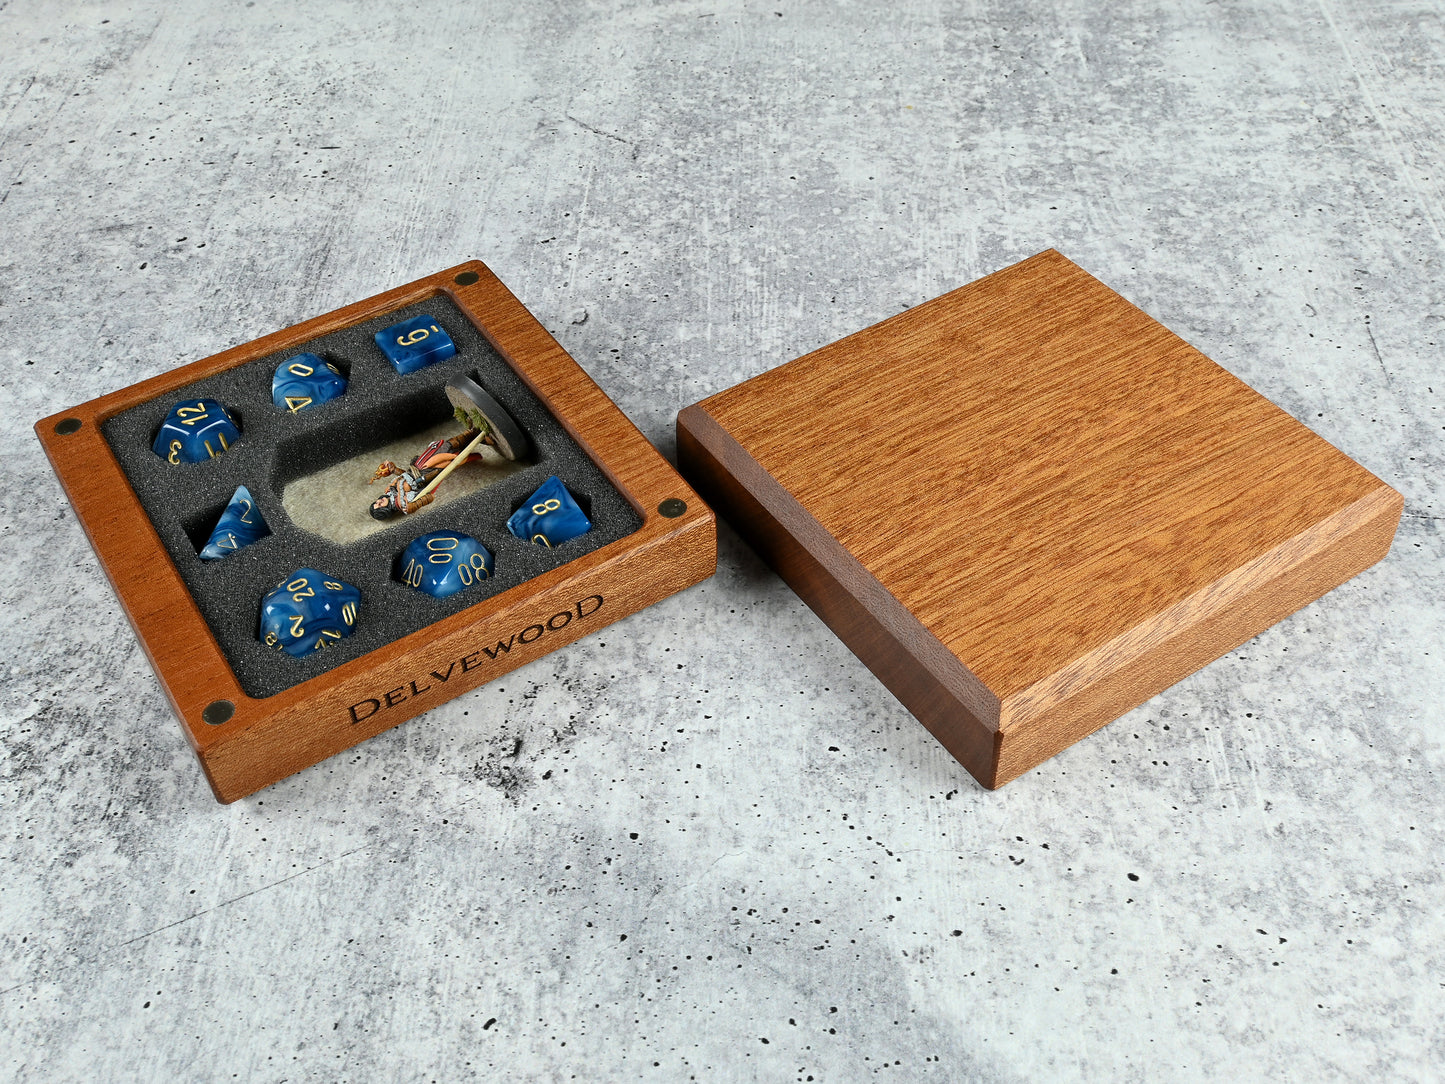 Sapele Little Delver dice box for dungeons & dragons tabletop rpg dnd.